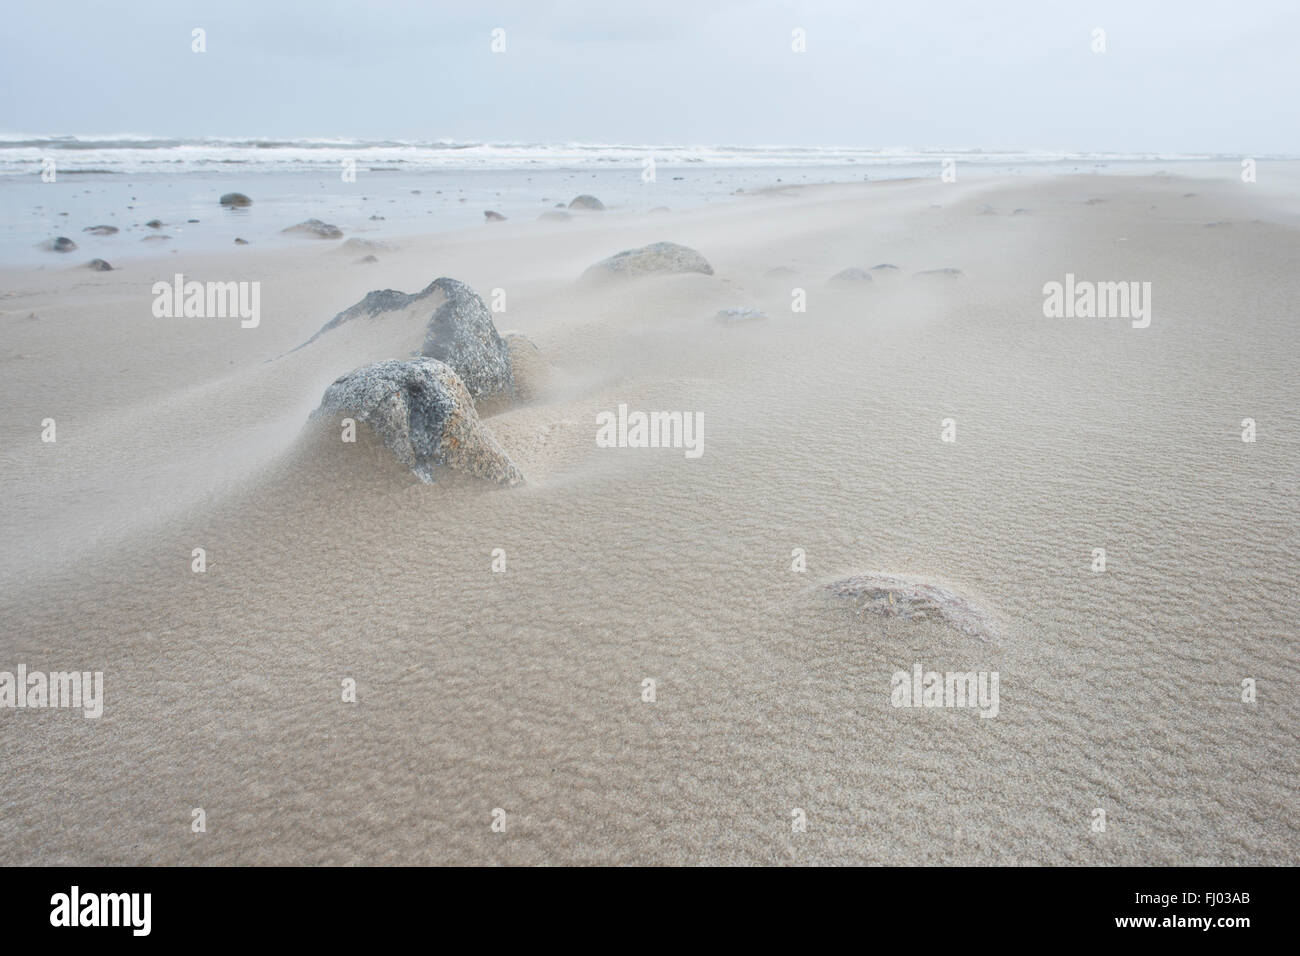 Stones and windblown sand on the sandy beach of Langeoog, East Frisia, Lower Saxony, Germany Stock Photo